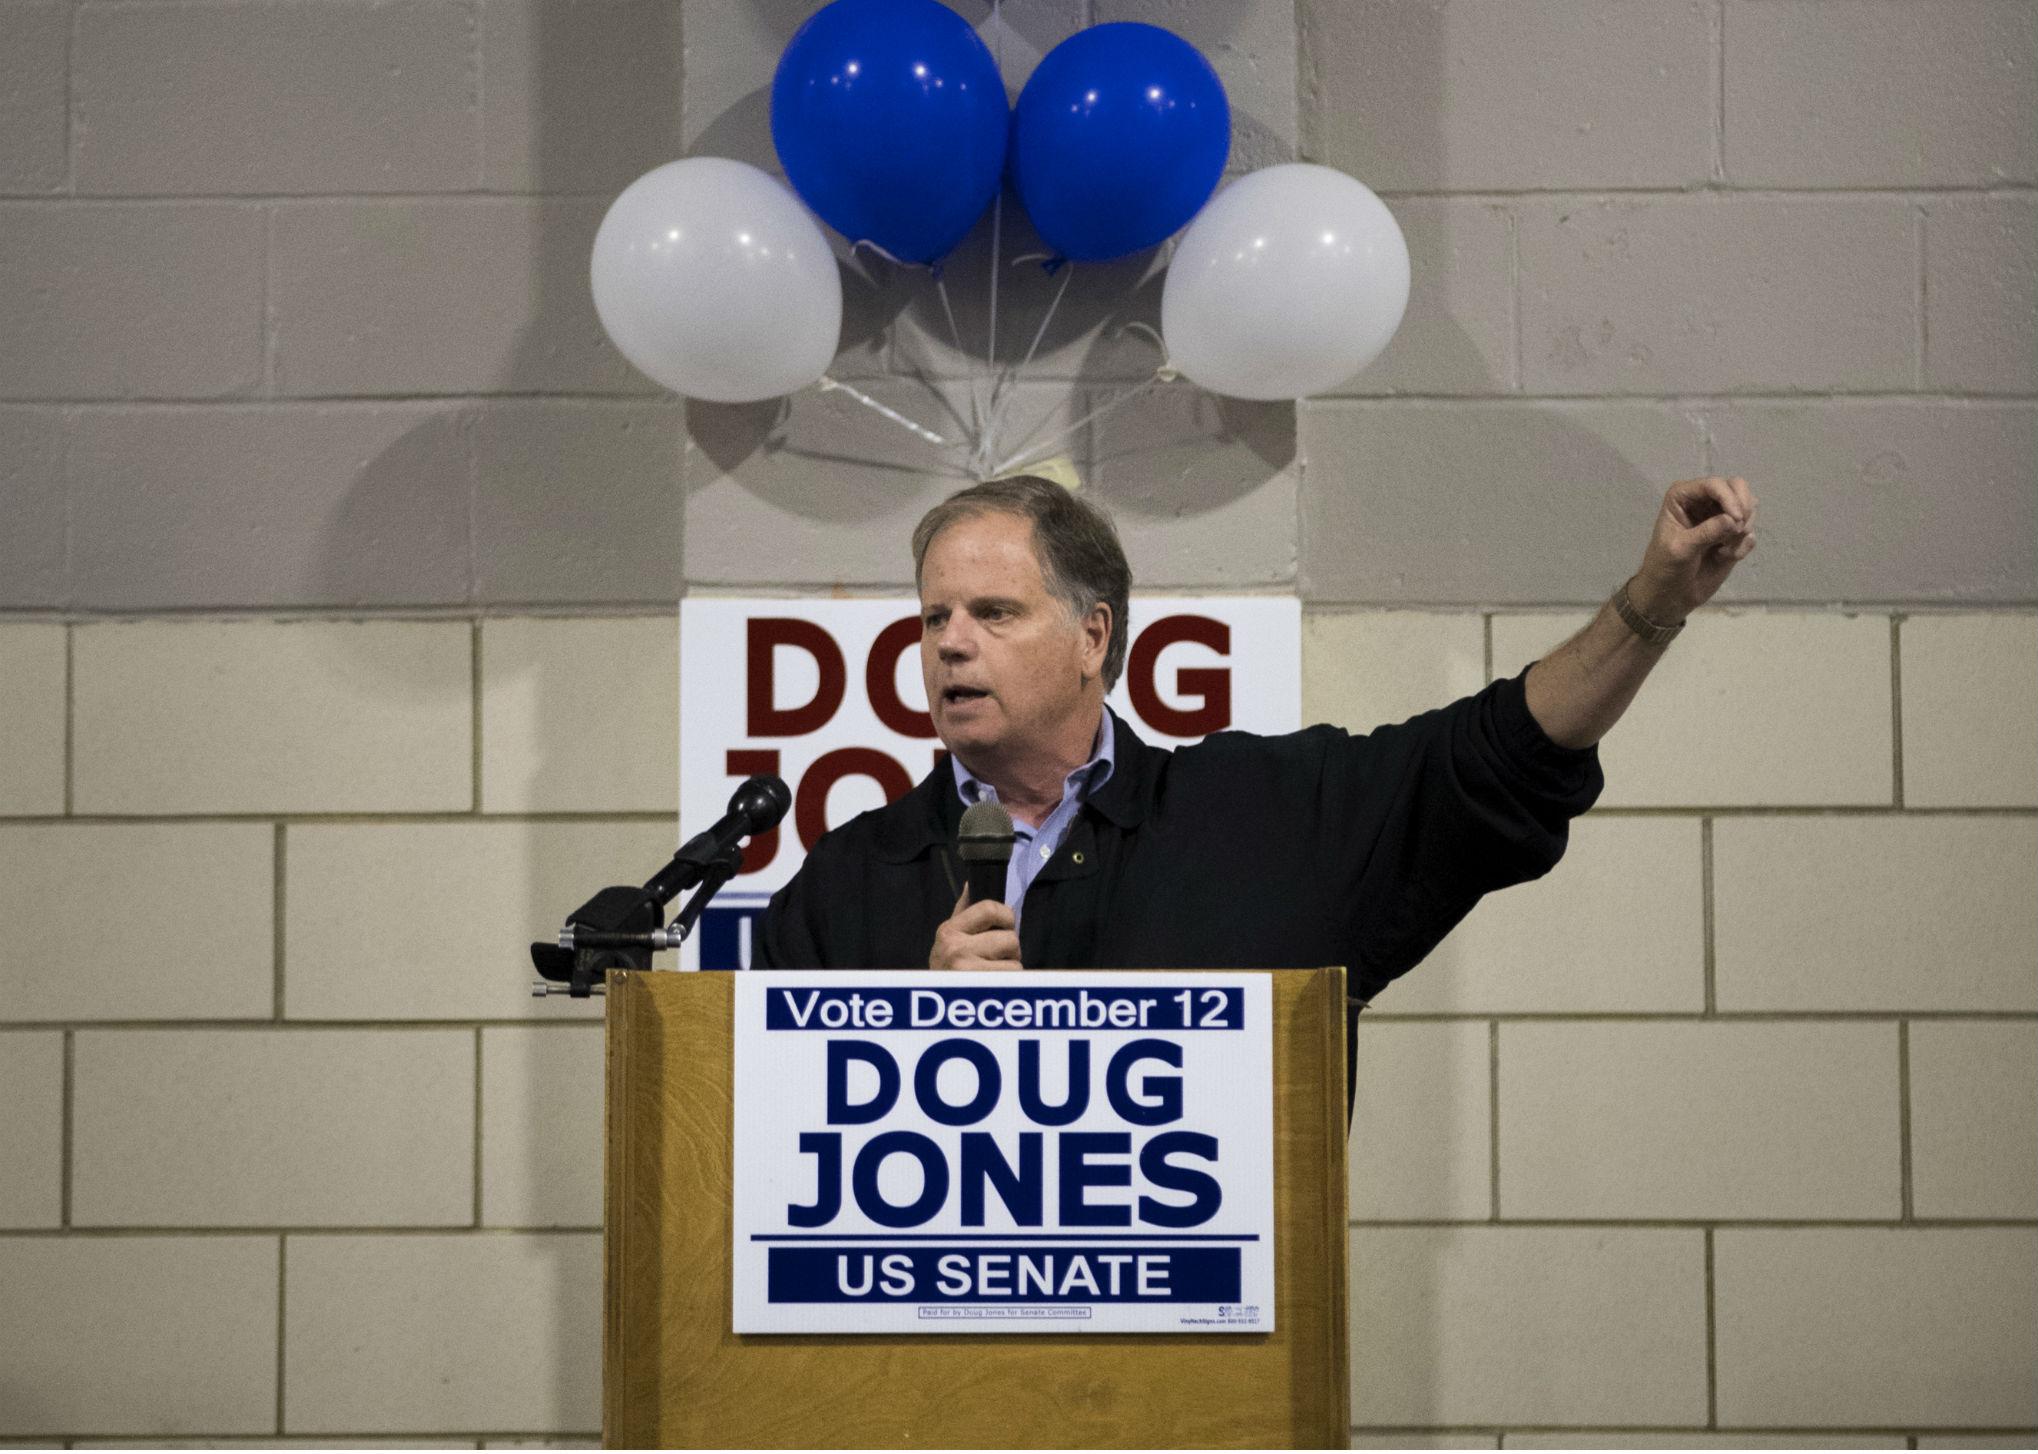 Democratic candidate for US Senate Doug Jones (Photo by Drew Angerer/Getty Images)